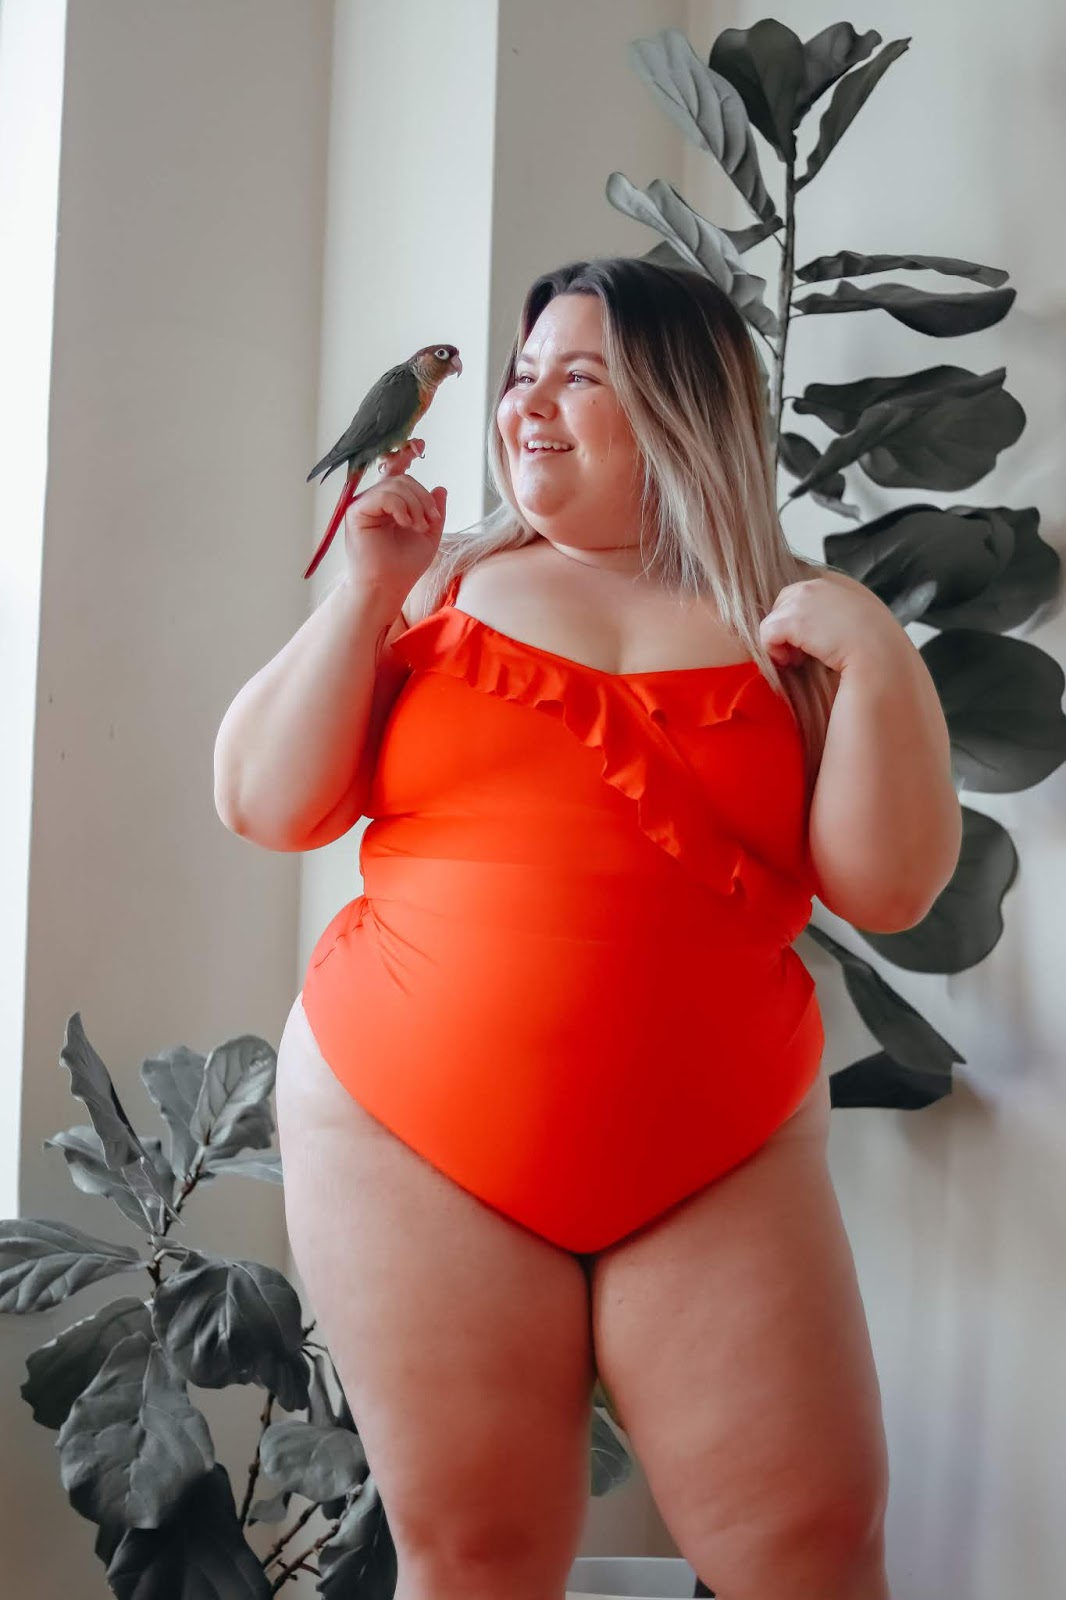 MY LATEST SIZE SWIMWEAR OBSESSION — Natalie in the City